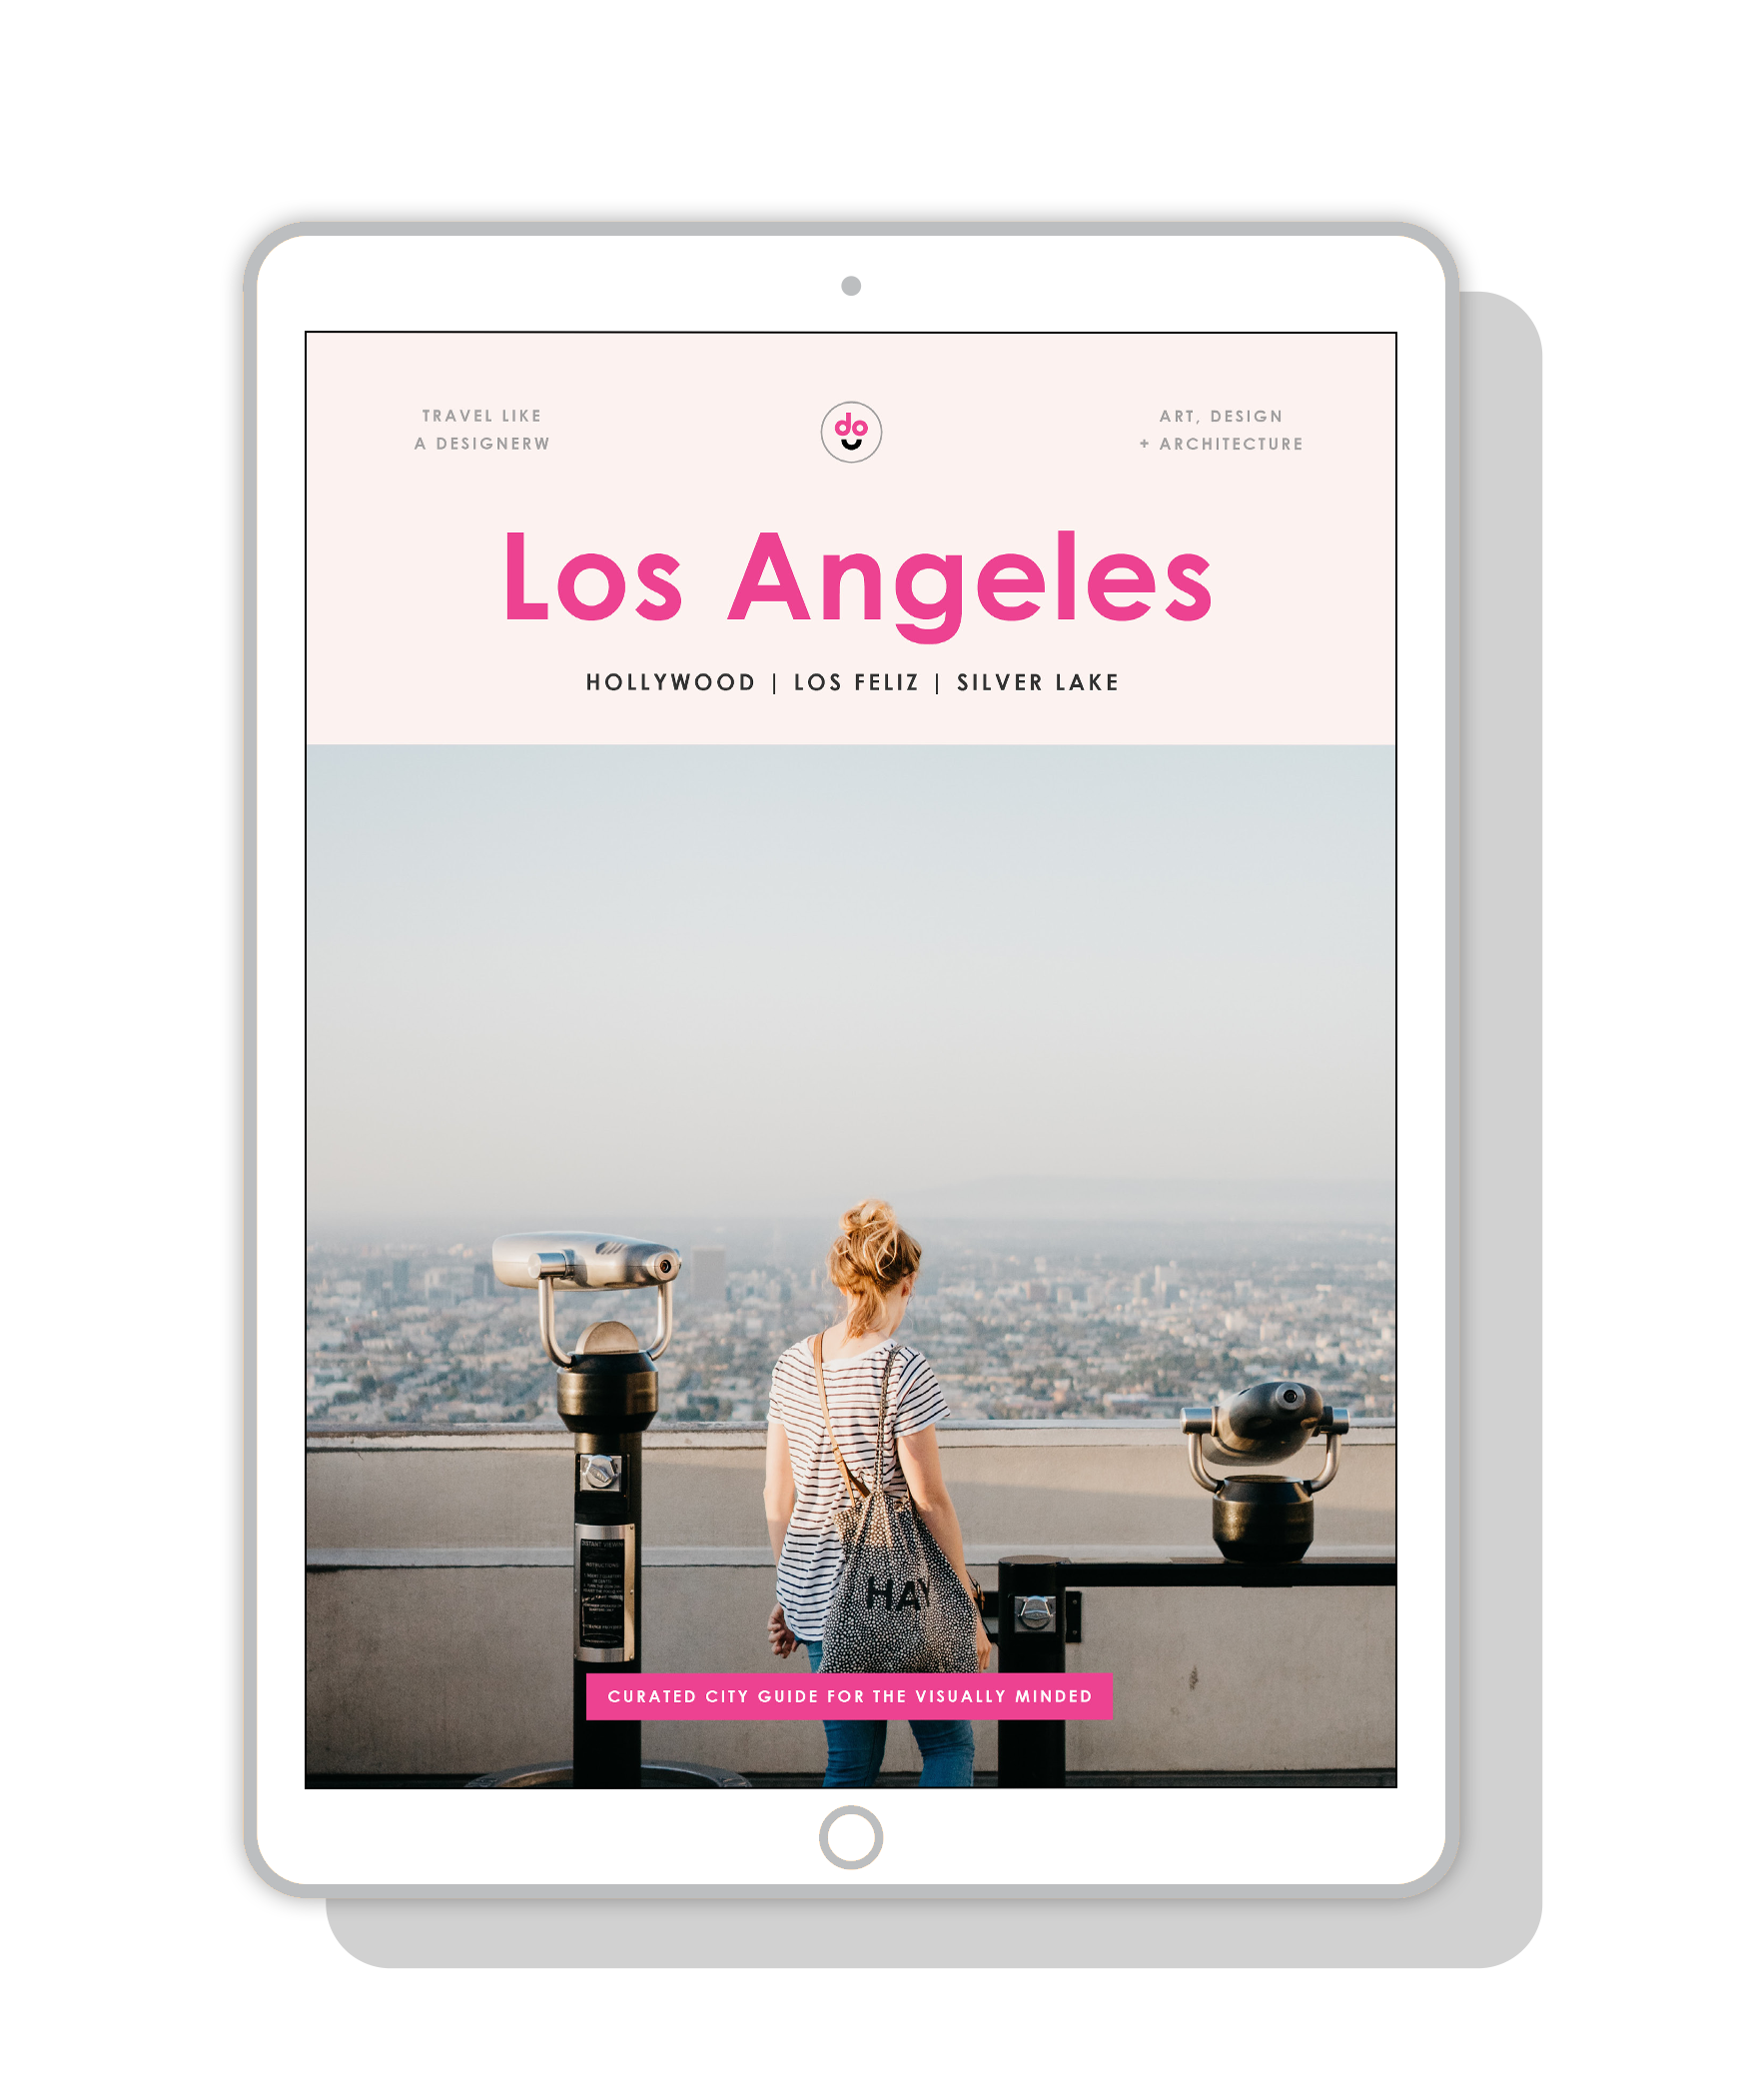 DO Travel Guide, Curated City Guide for the Visually Minded: Los Angeles Hollywood, digital travel guide cover design | by www.alicia-carvalho.com